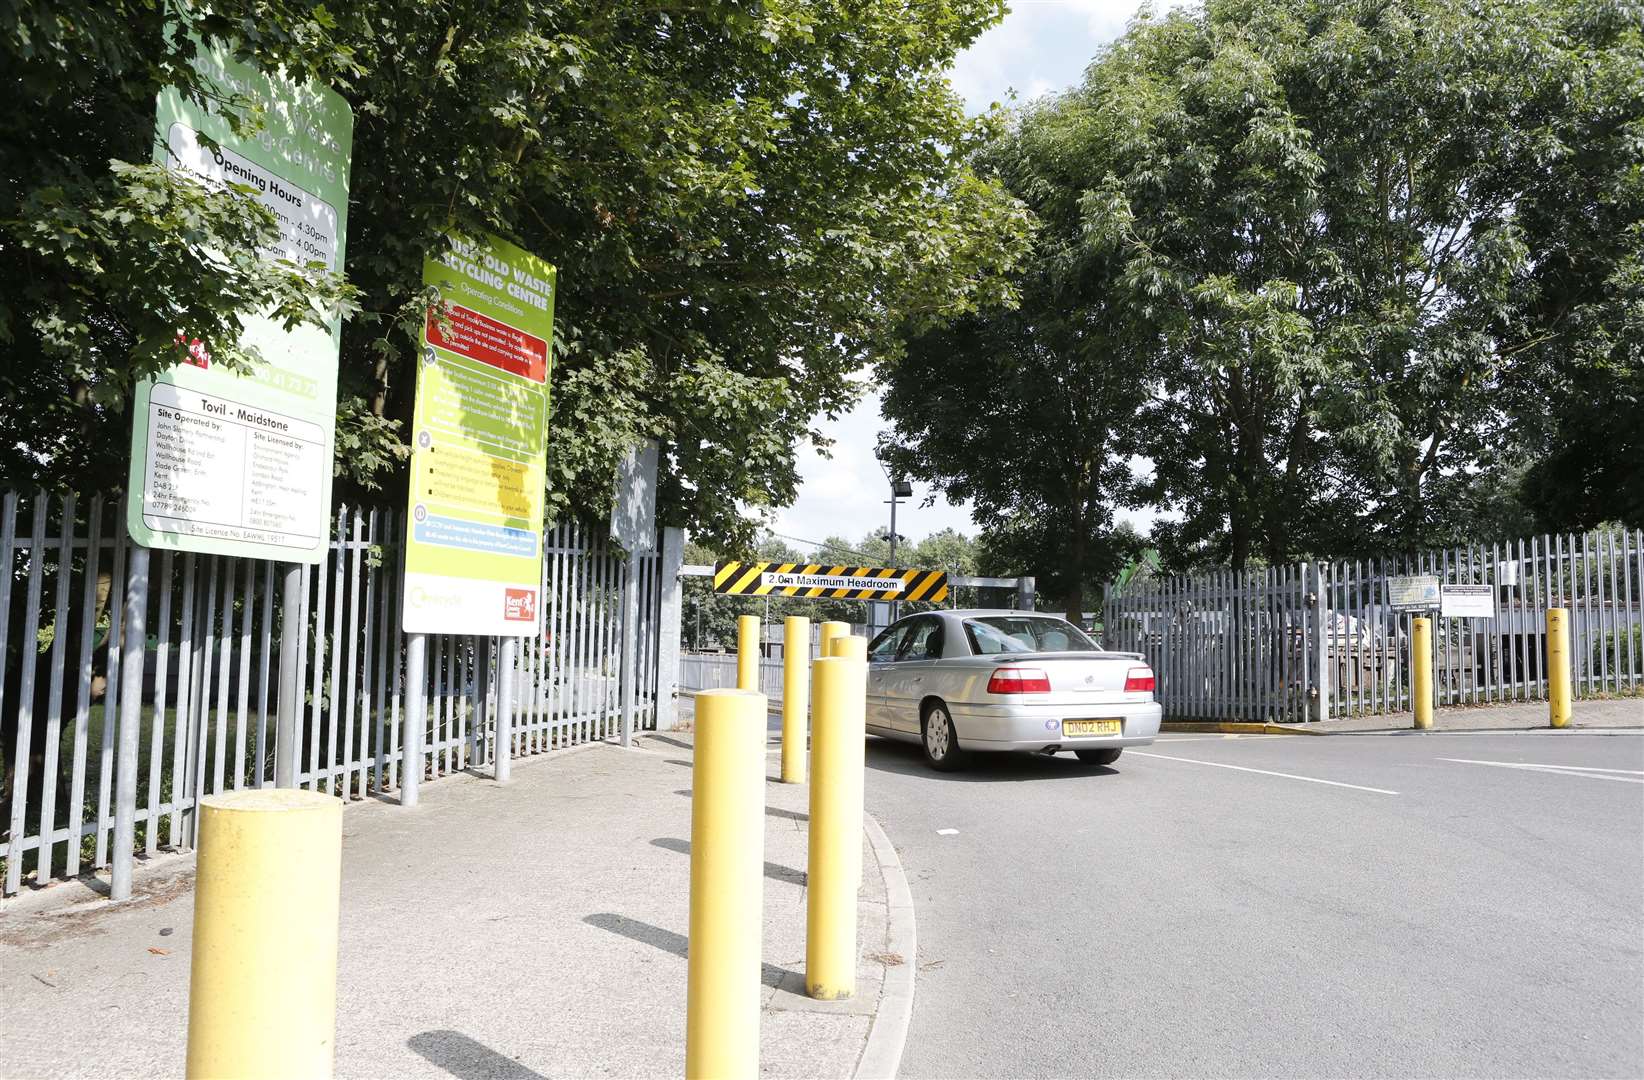 The Tovil Recycling Centre